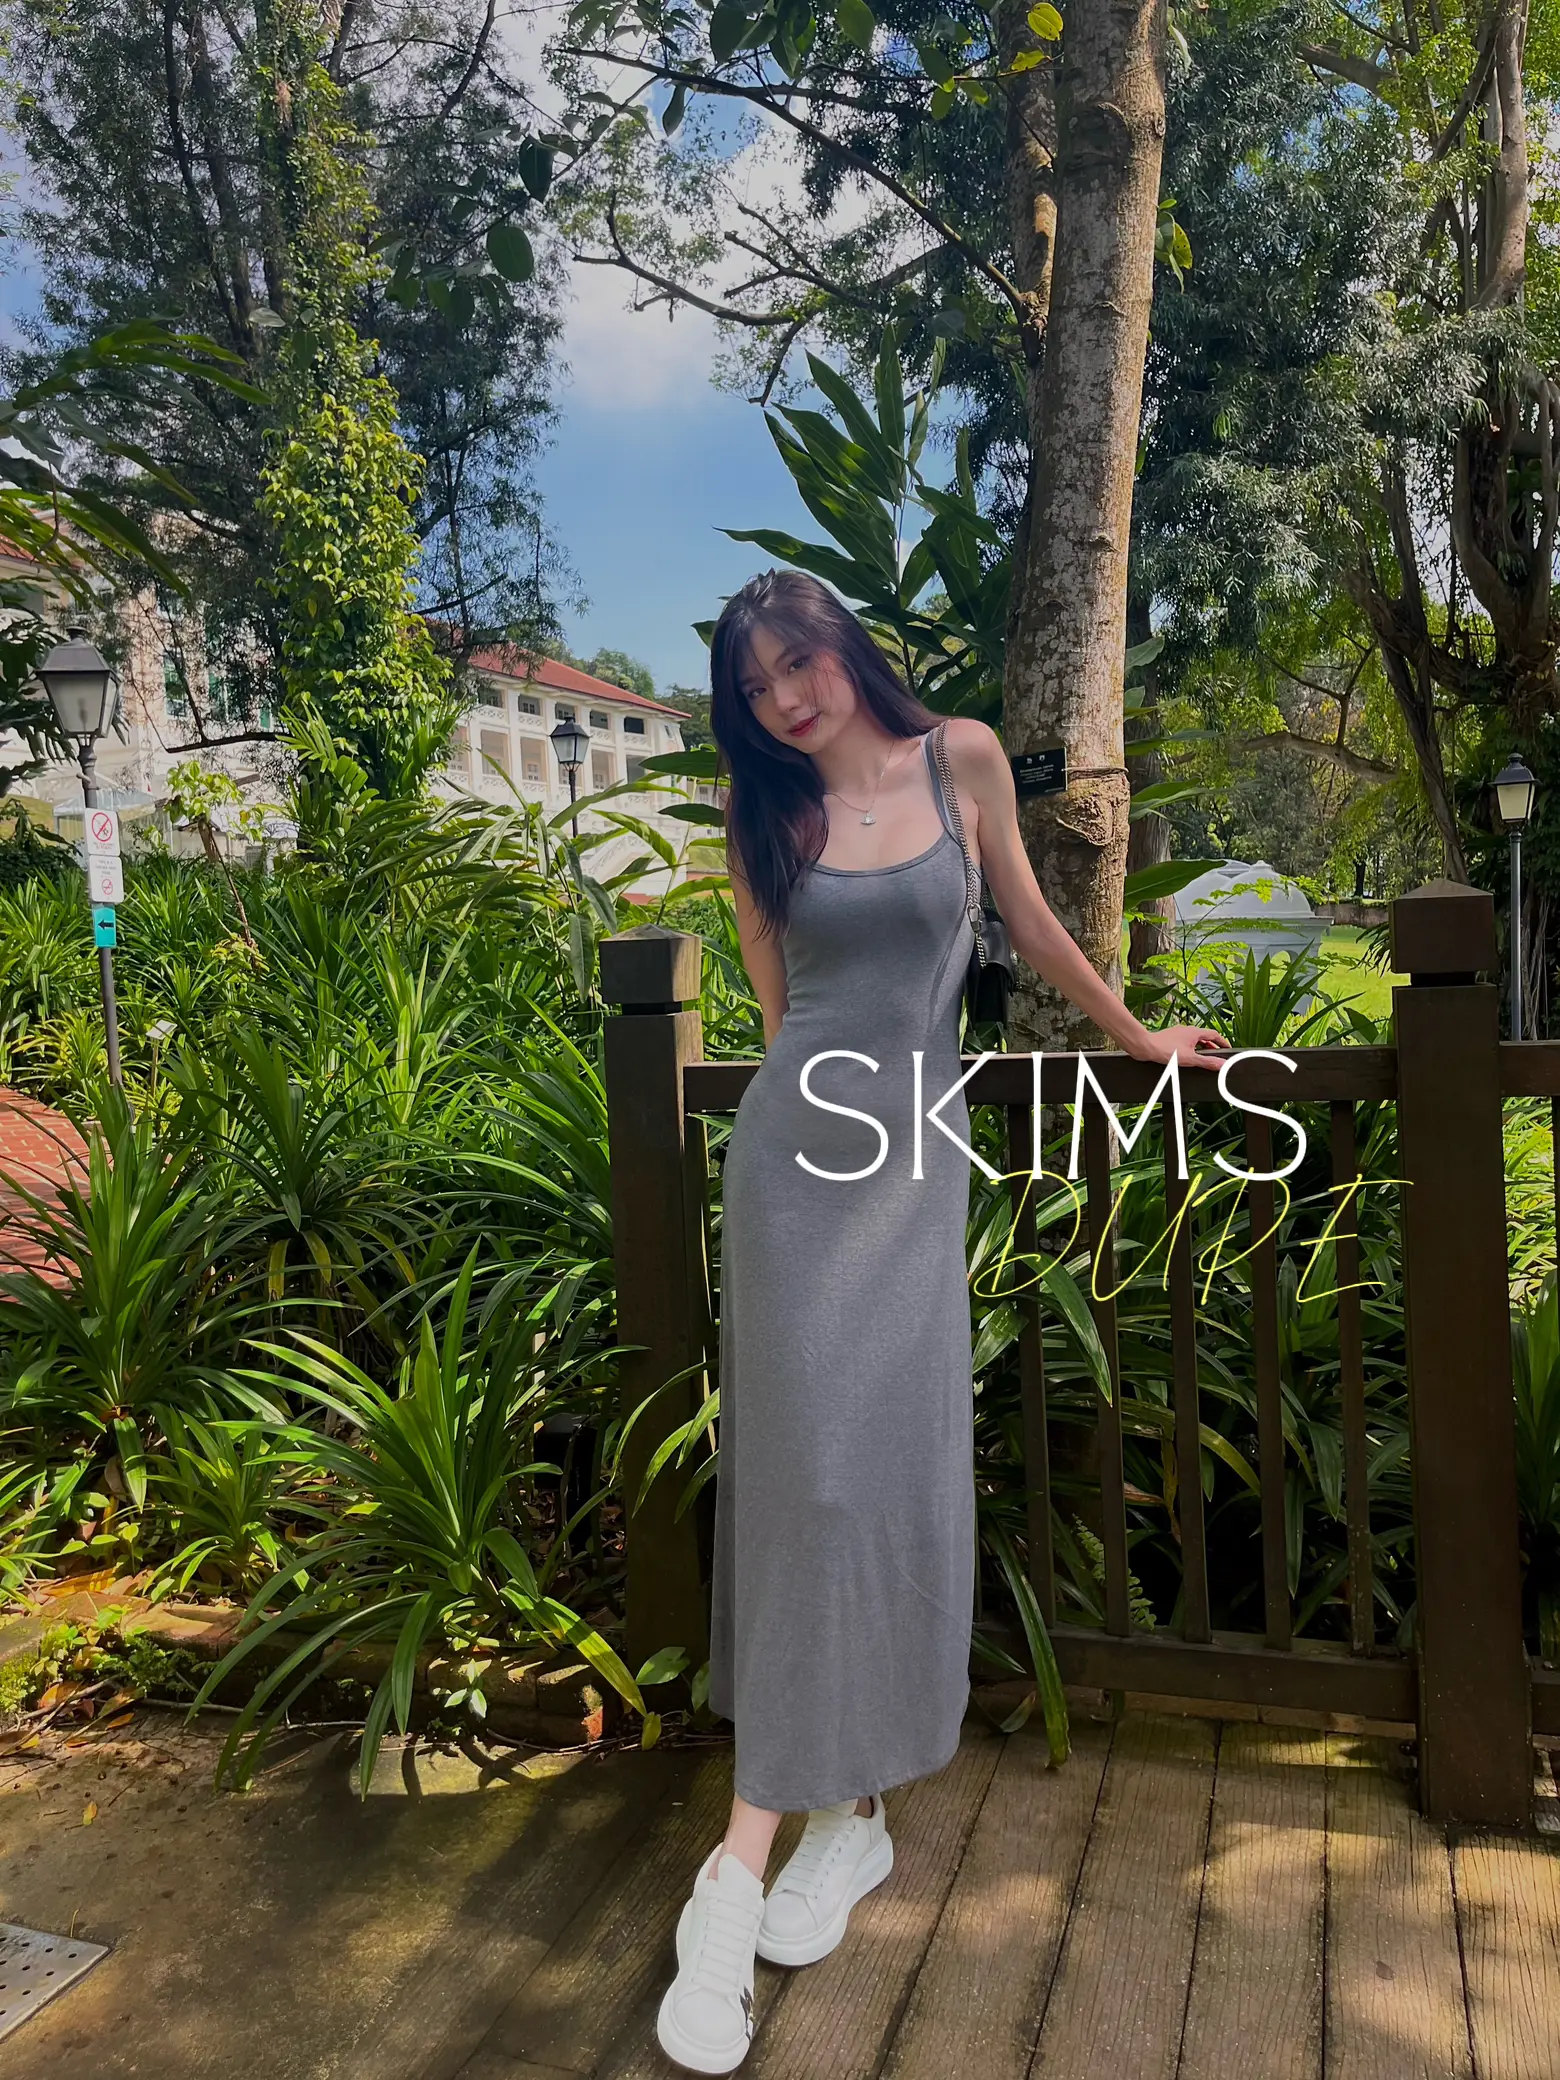 More for Less: SKIMS $13 Dupe from SHEIN, Gallery posted by Mandy Wong